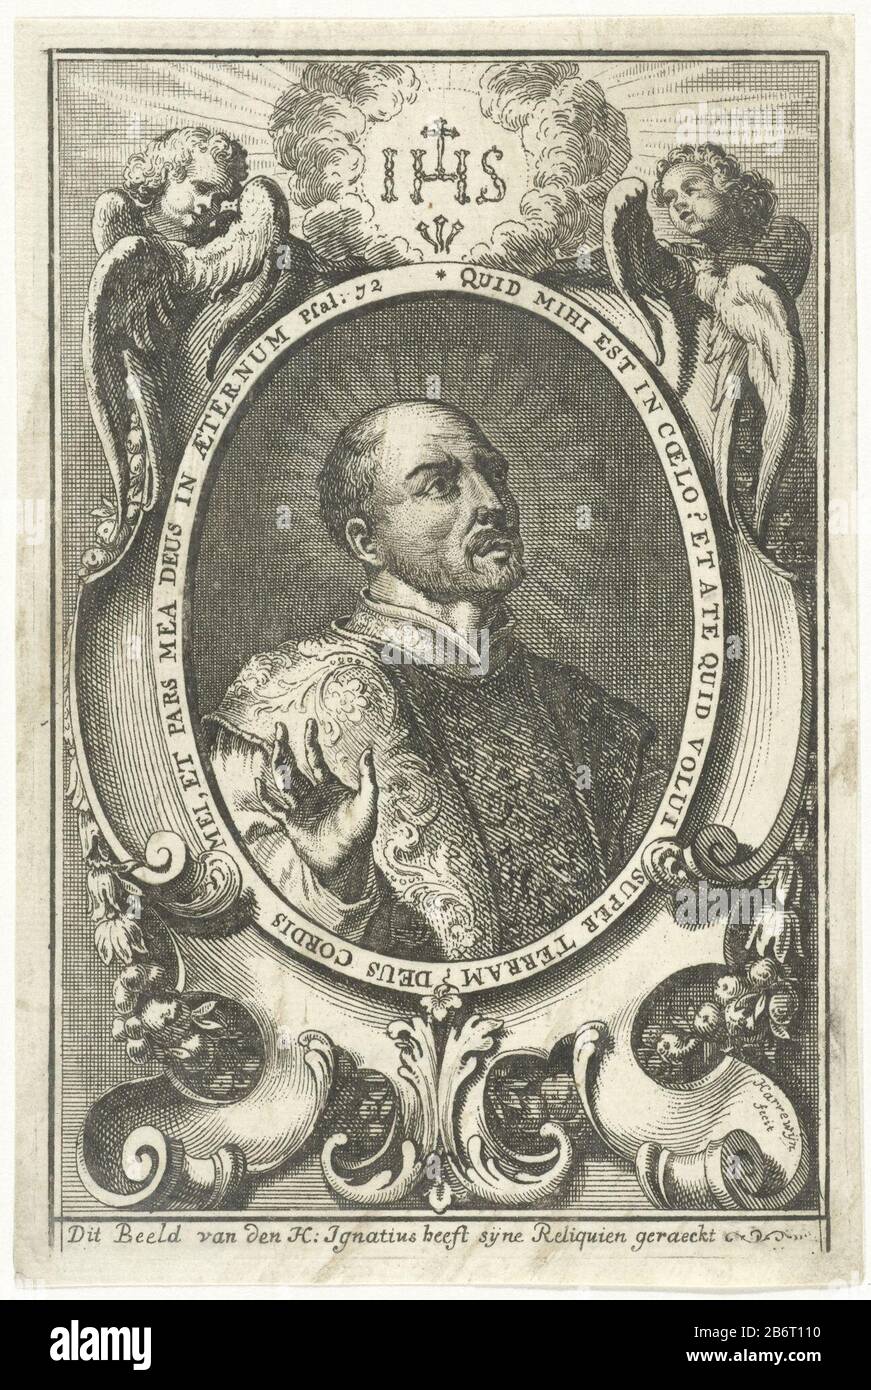 H Ignatius van Loyola St. Ignatius of Loyola right in an oval, within a cartouche decorated with garlands. Top two cherubs' heads and wings. At the top monogram IHS in a cloud and stralenkrans. Manufacturer : printmaker: James Harrewijn (listed building) printmaker François Harrewijn (rejected attribution) Place manufacture: Netherlands Date: 1682 - 1727 Physical features: etching and engra material: paper Technique: etching / engra (printing process) Measurements: plate edge: h × 129 mm b 85 mm Subject: personal devotion of St. Ignatius of Loyola Ornament  festoon, garland Stock Photo